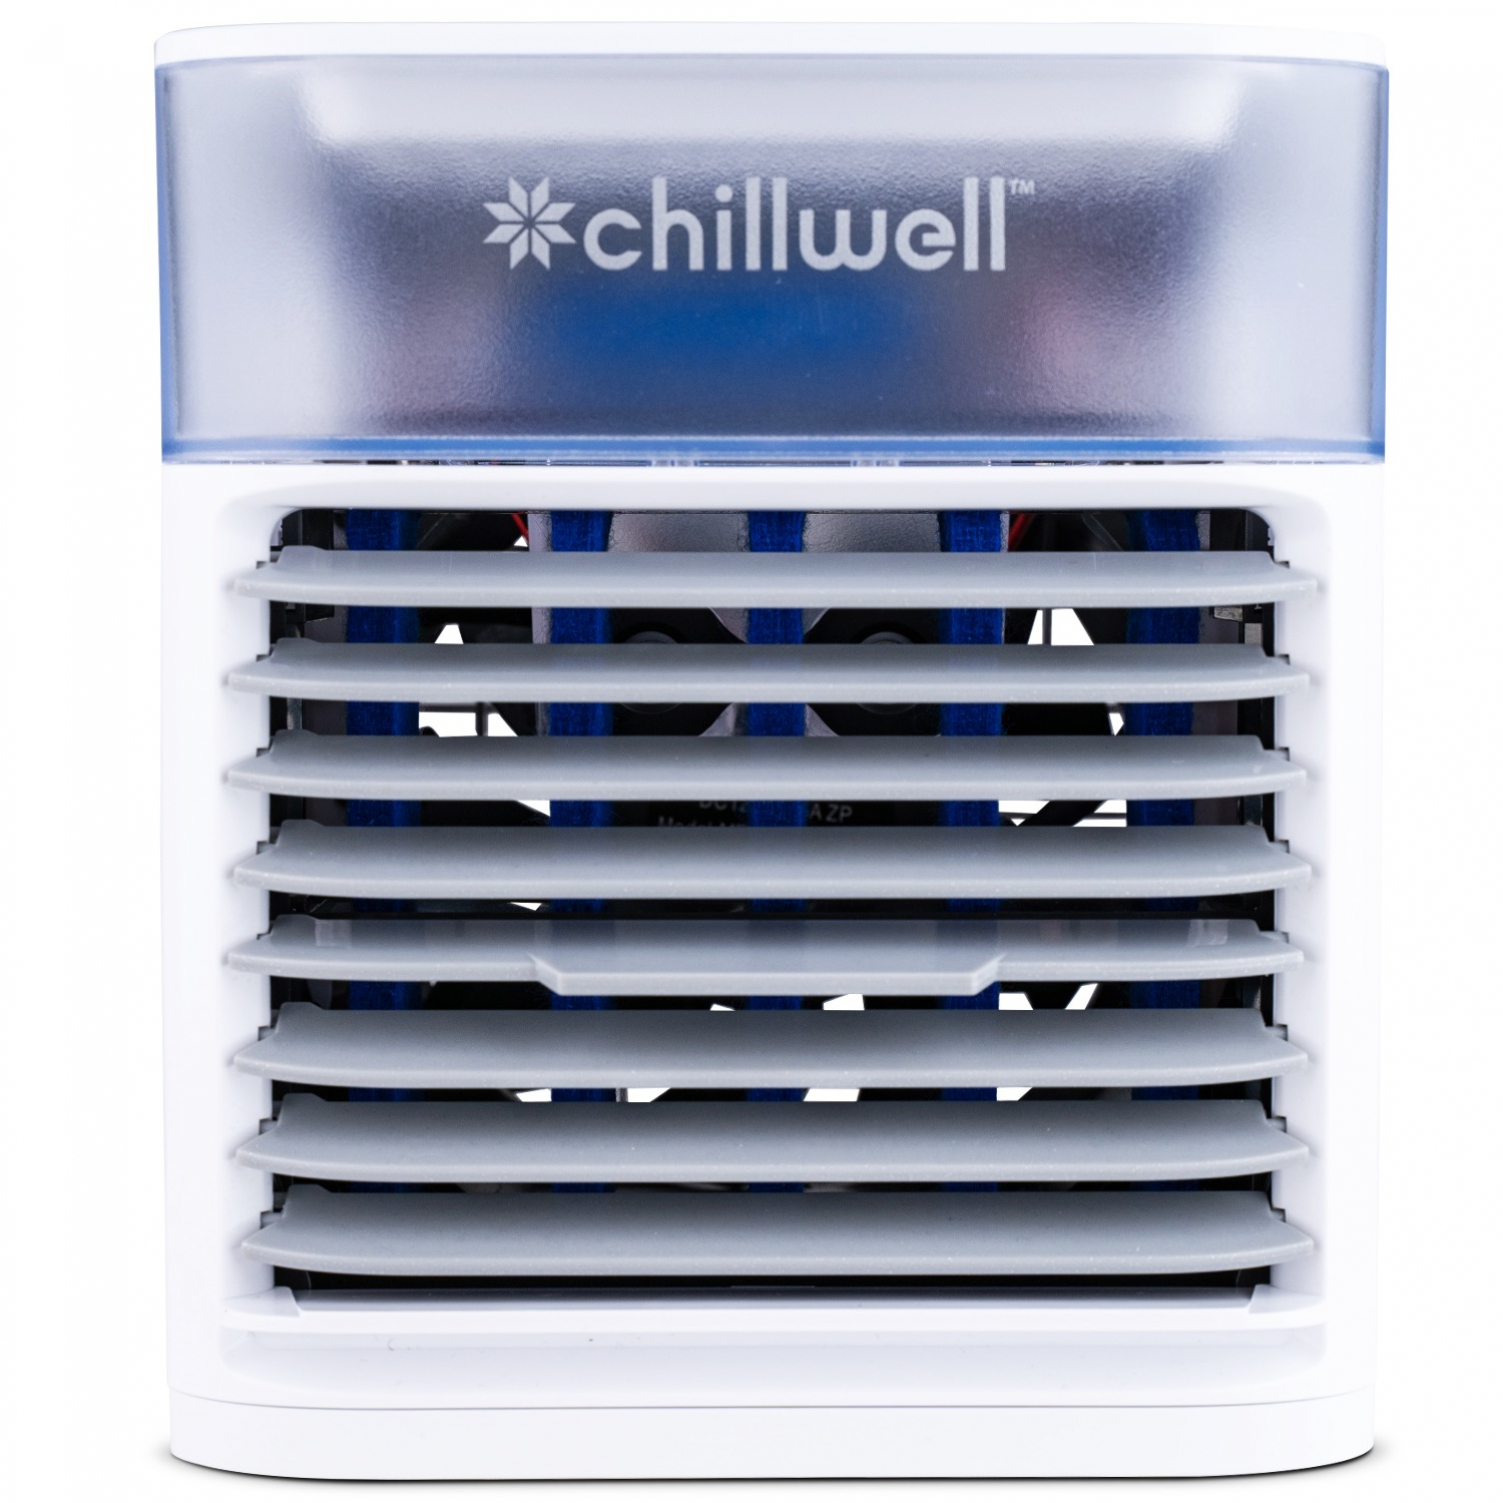 Chillwell AC Youtube Video